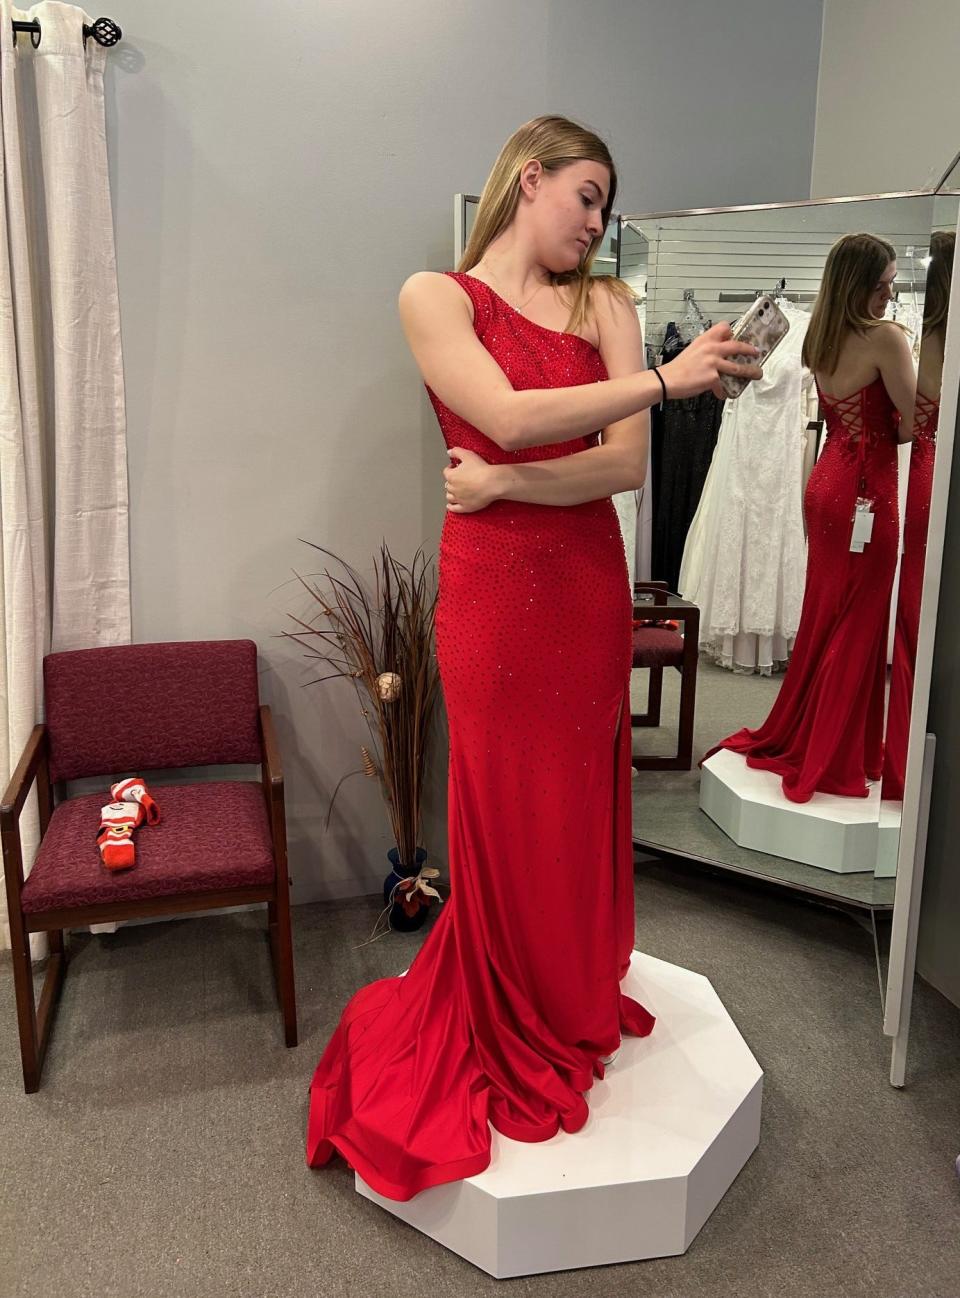 It is all about the back of the dress for Abby Barndt, who is thinking about the prom.